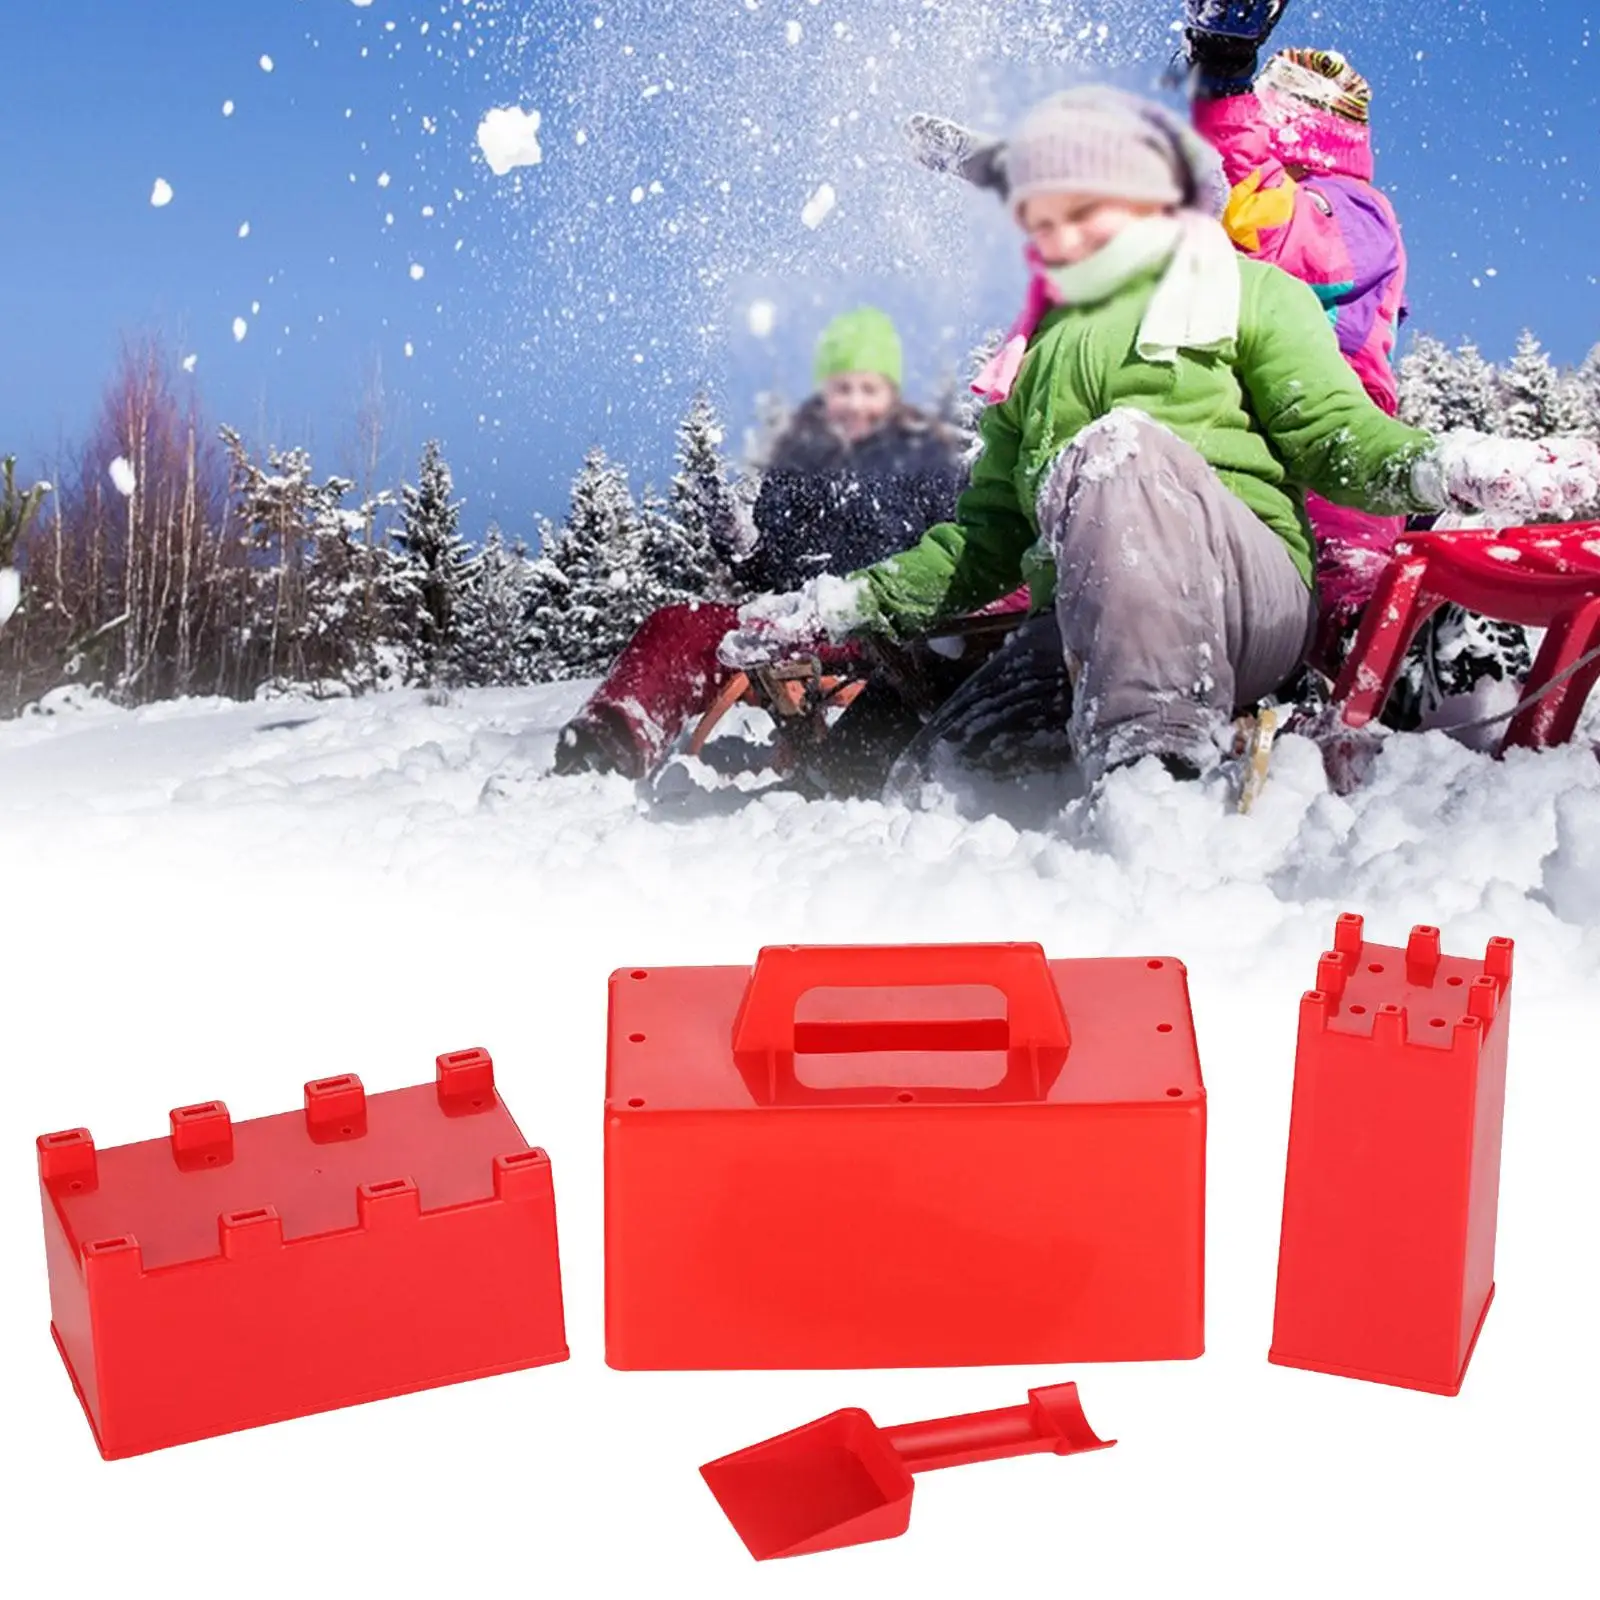 4x Sand Castle Model, Snow and Sand Beach Toys for Kids, Play Toys, Snow Brick Building Maker for Boys, Girls, Adults